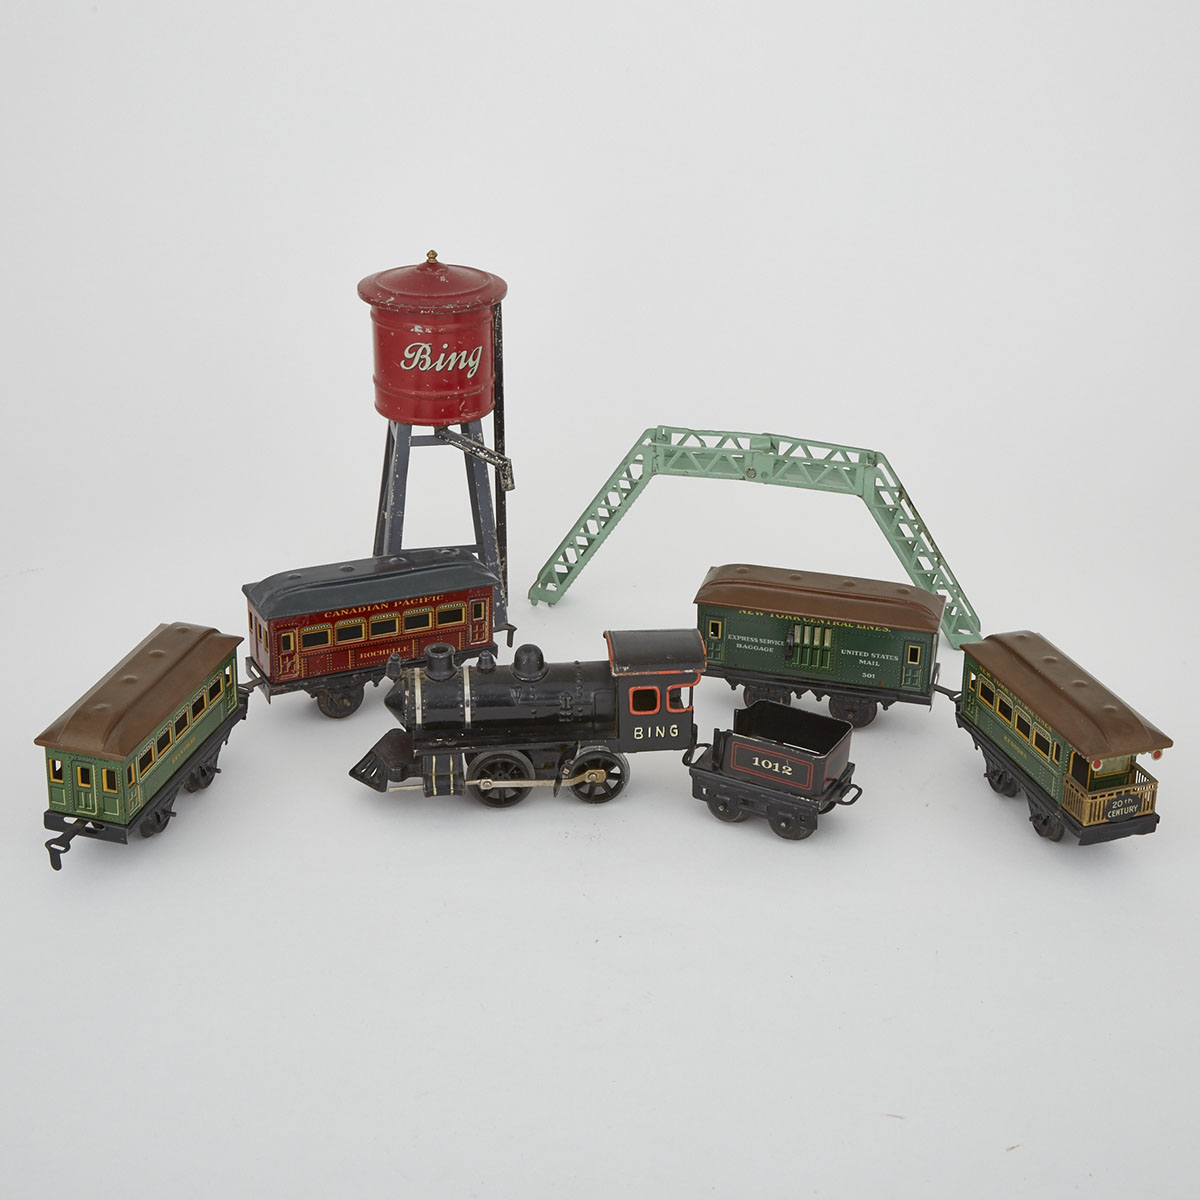 Bing Lithographed Tin Clockwork Train Set, early 20th century